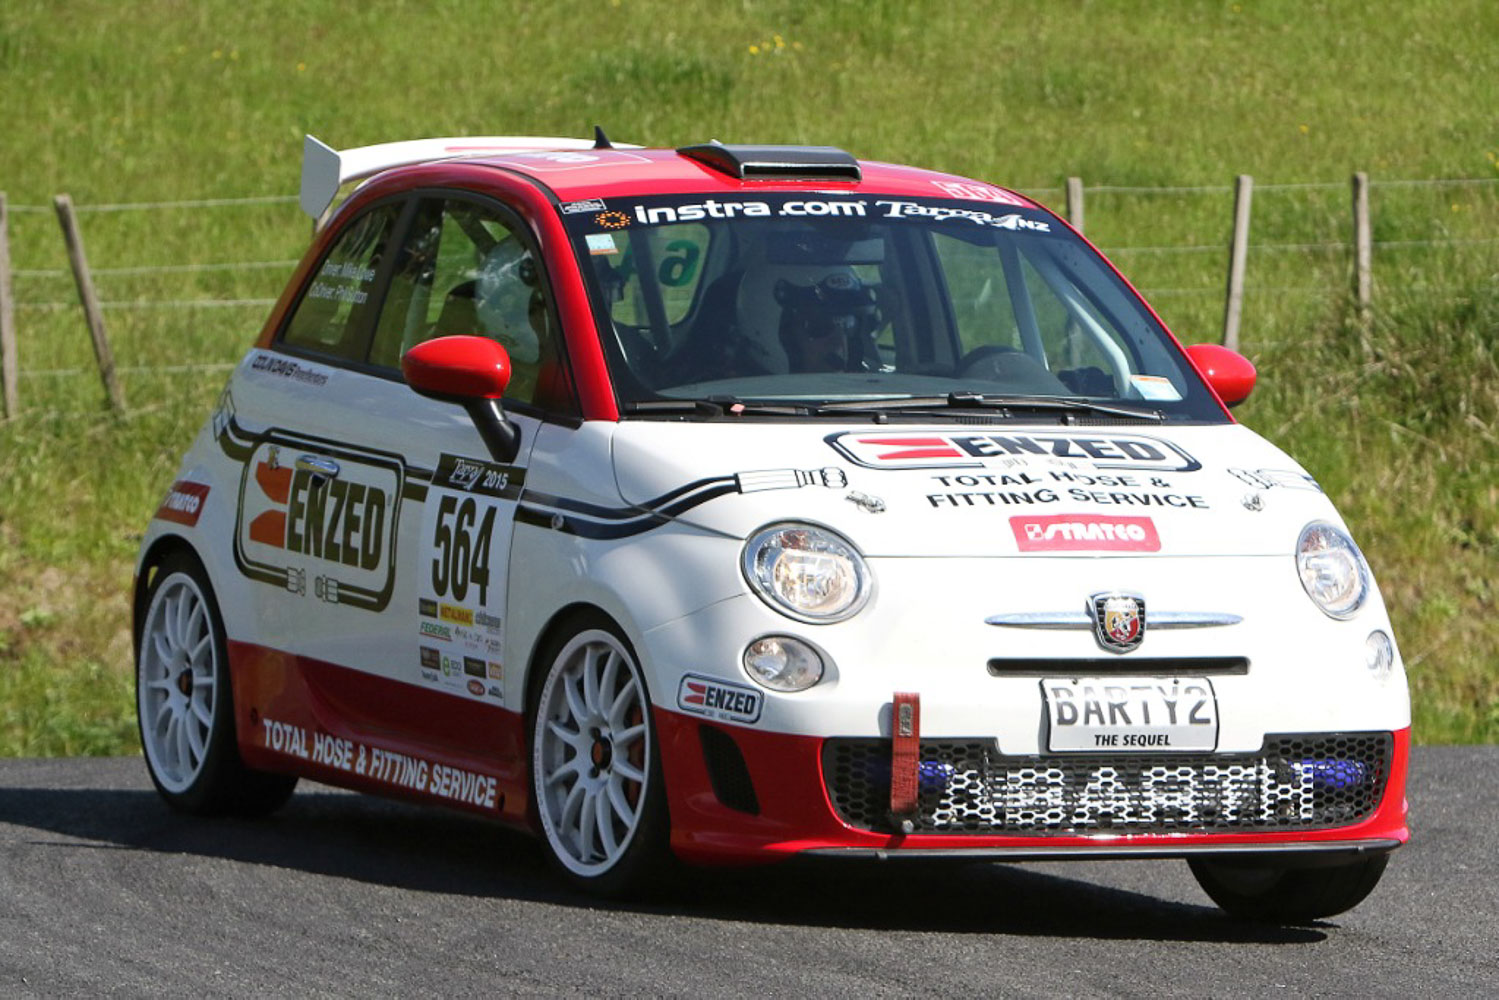 Meanwhile, getting the feel for their new car was Mike Lowe and co-driver Philip Sutton in the Enzed Abarth